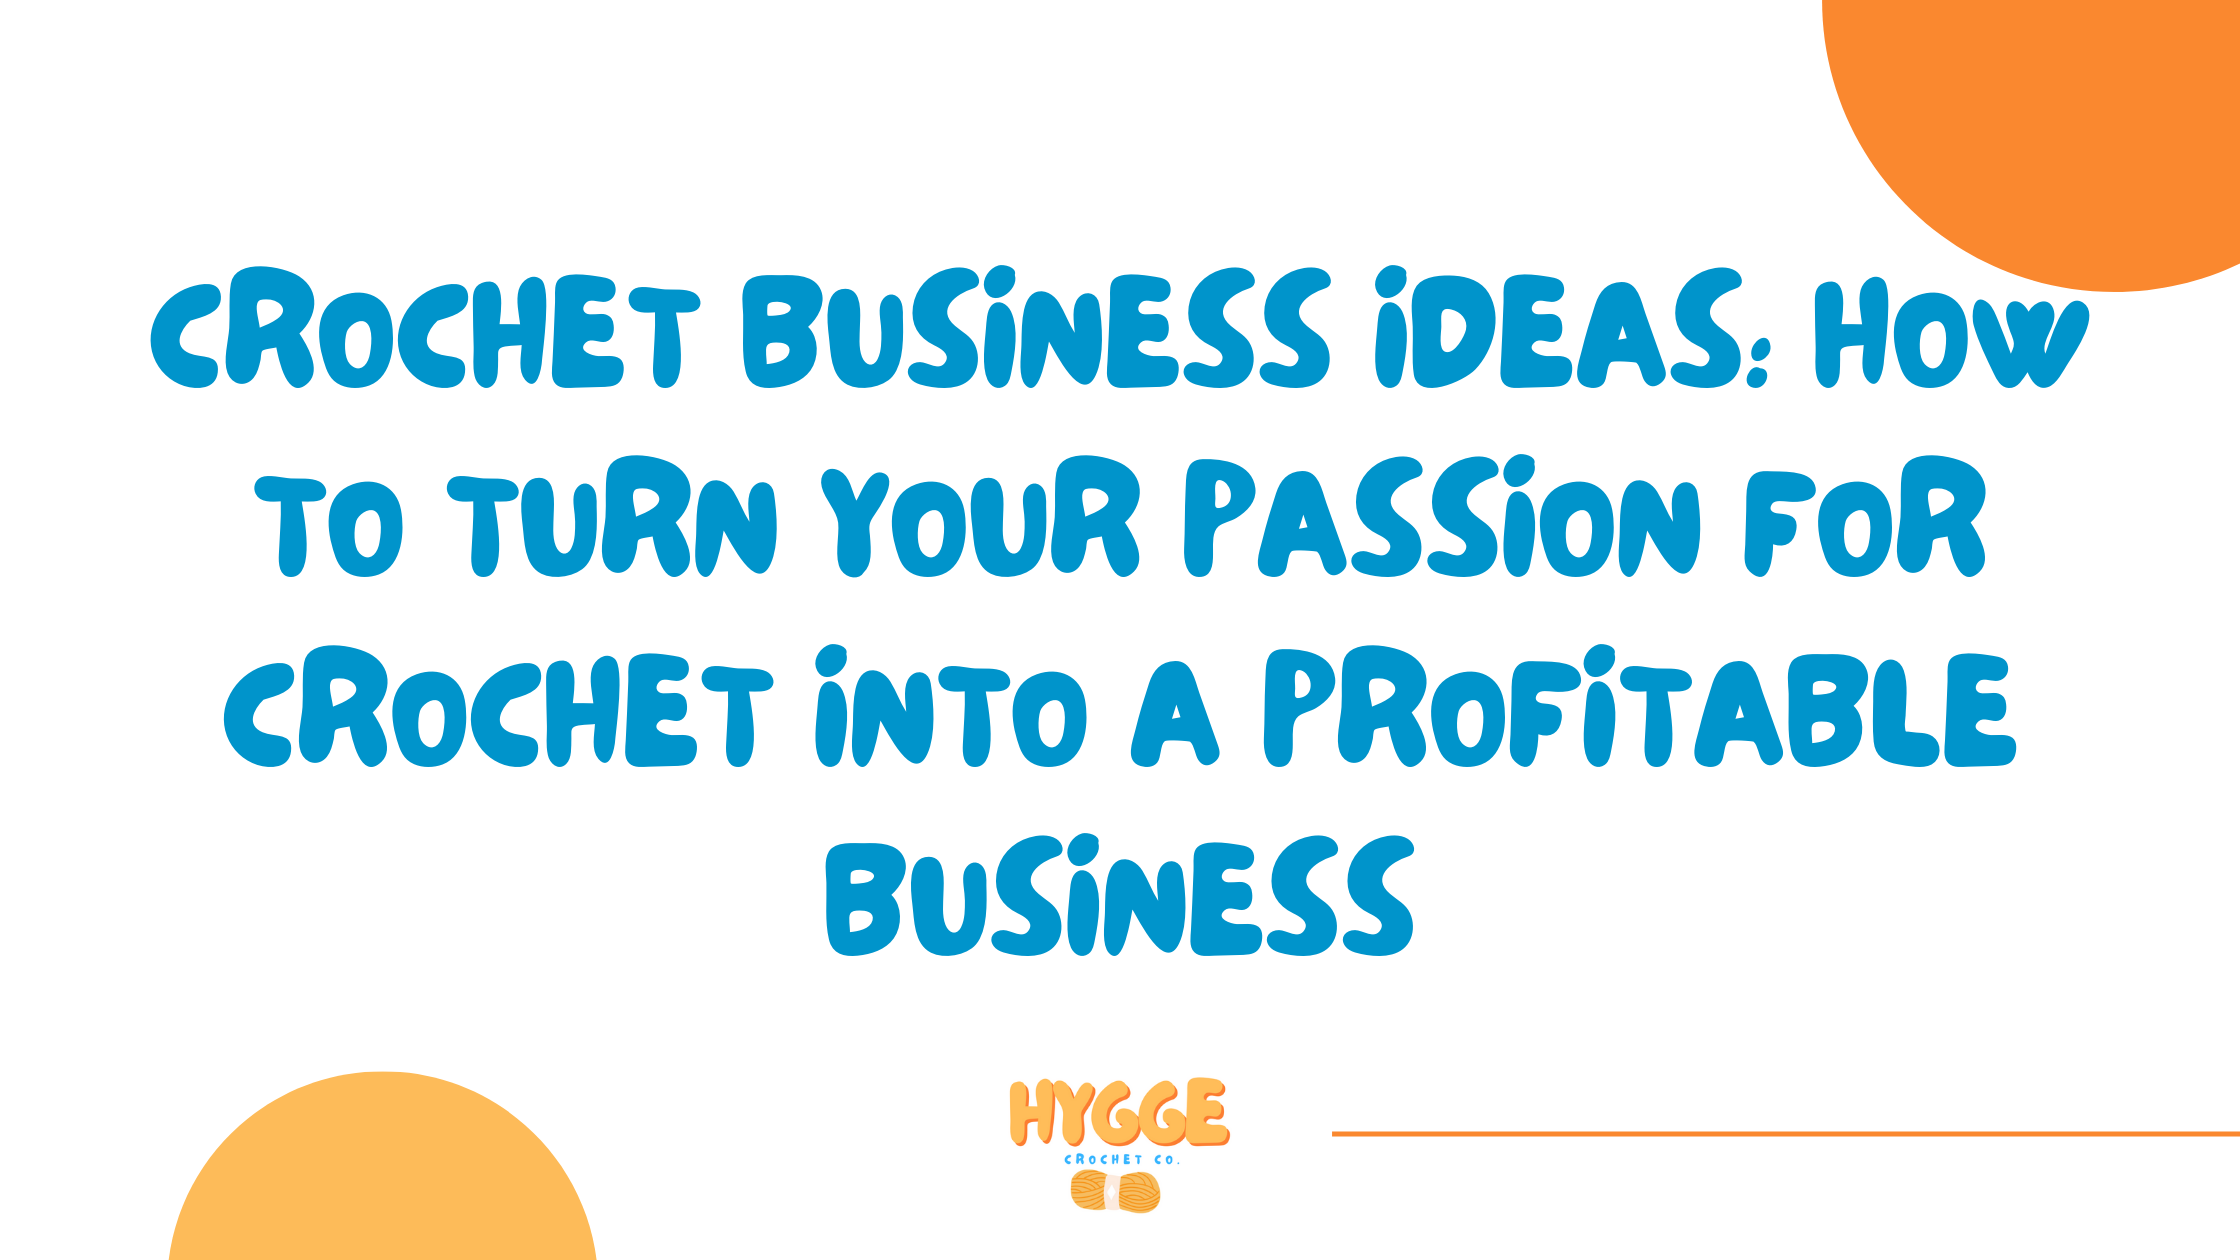 Crochet Business Ideas: How to Turn Your Passion for Crochet into a Profitable Business